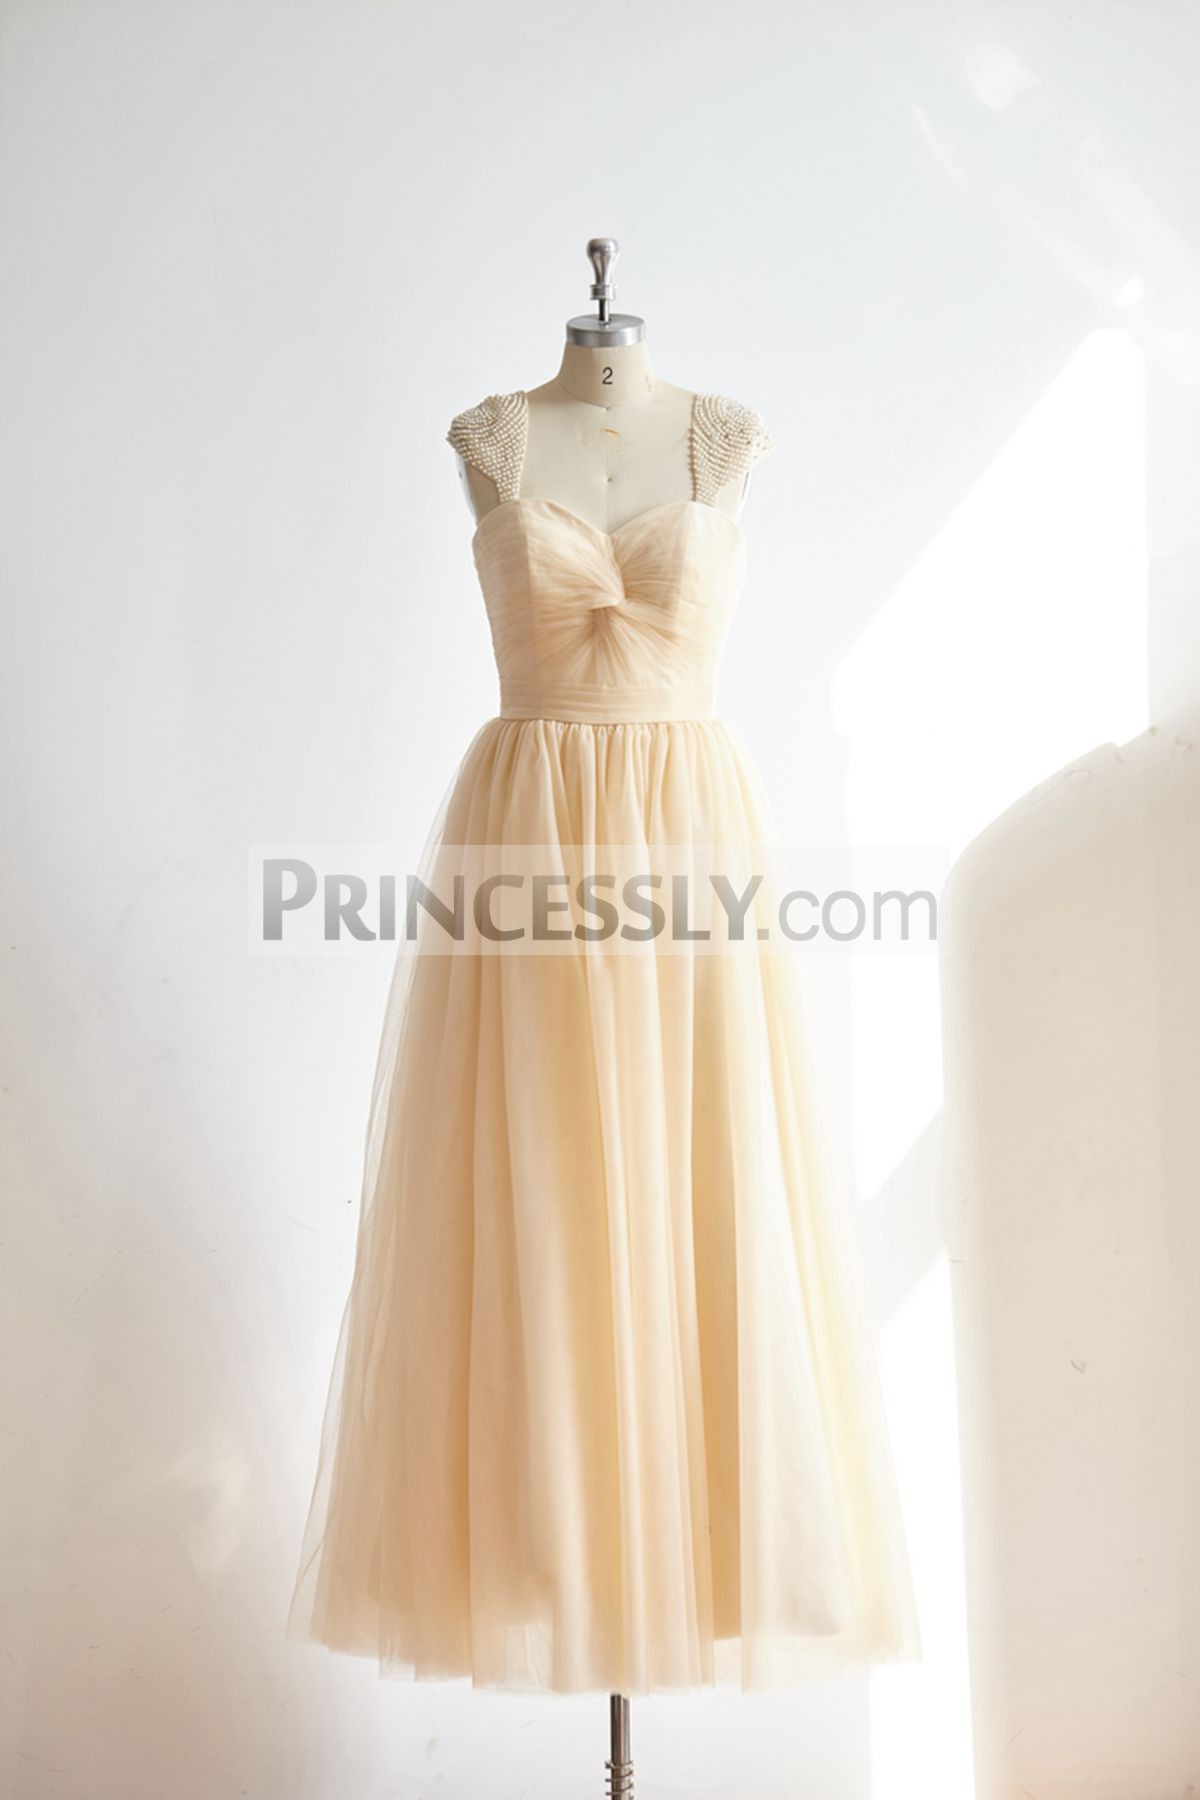 Princessly.com-K1000319-Sweetheart Champagne Tulle Pearl Cap Sleeves Long Prom Party Dress-31